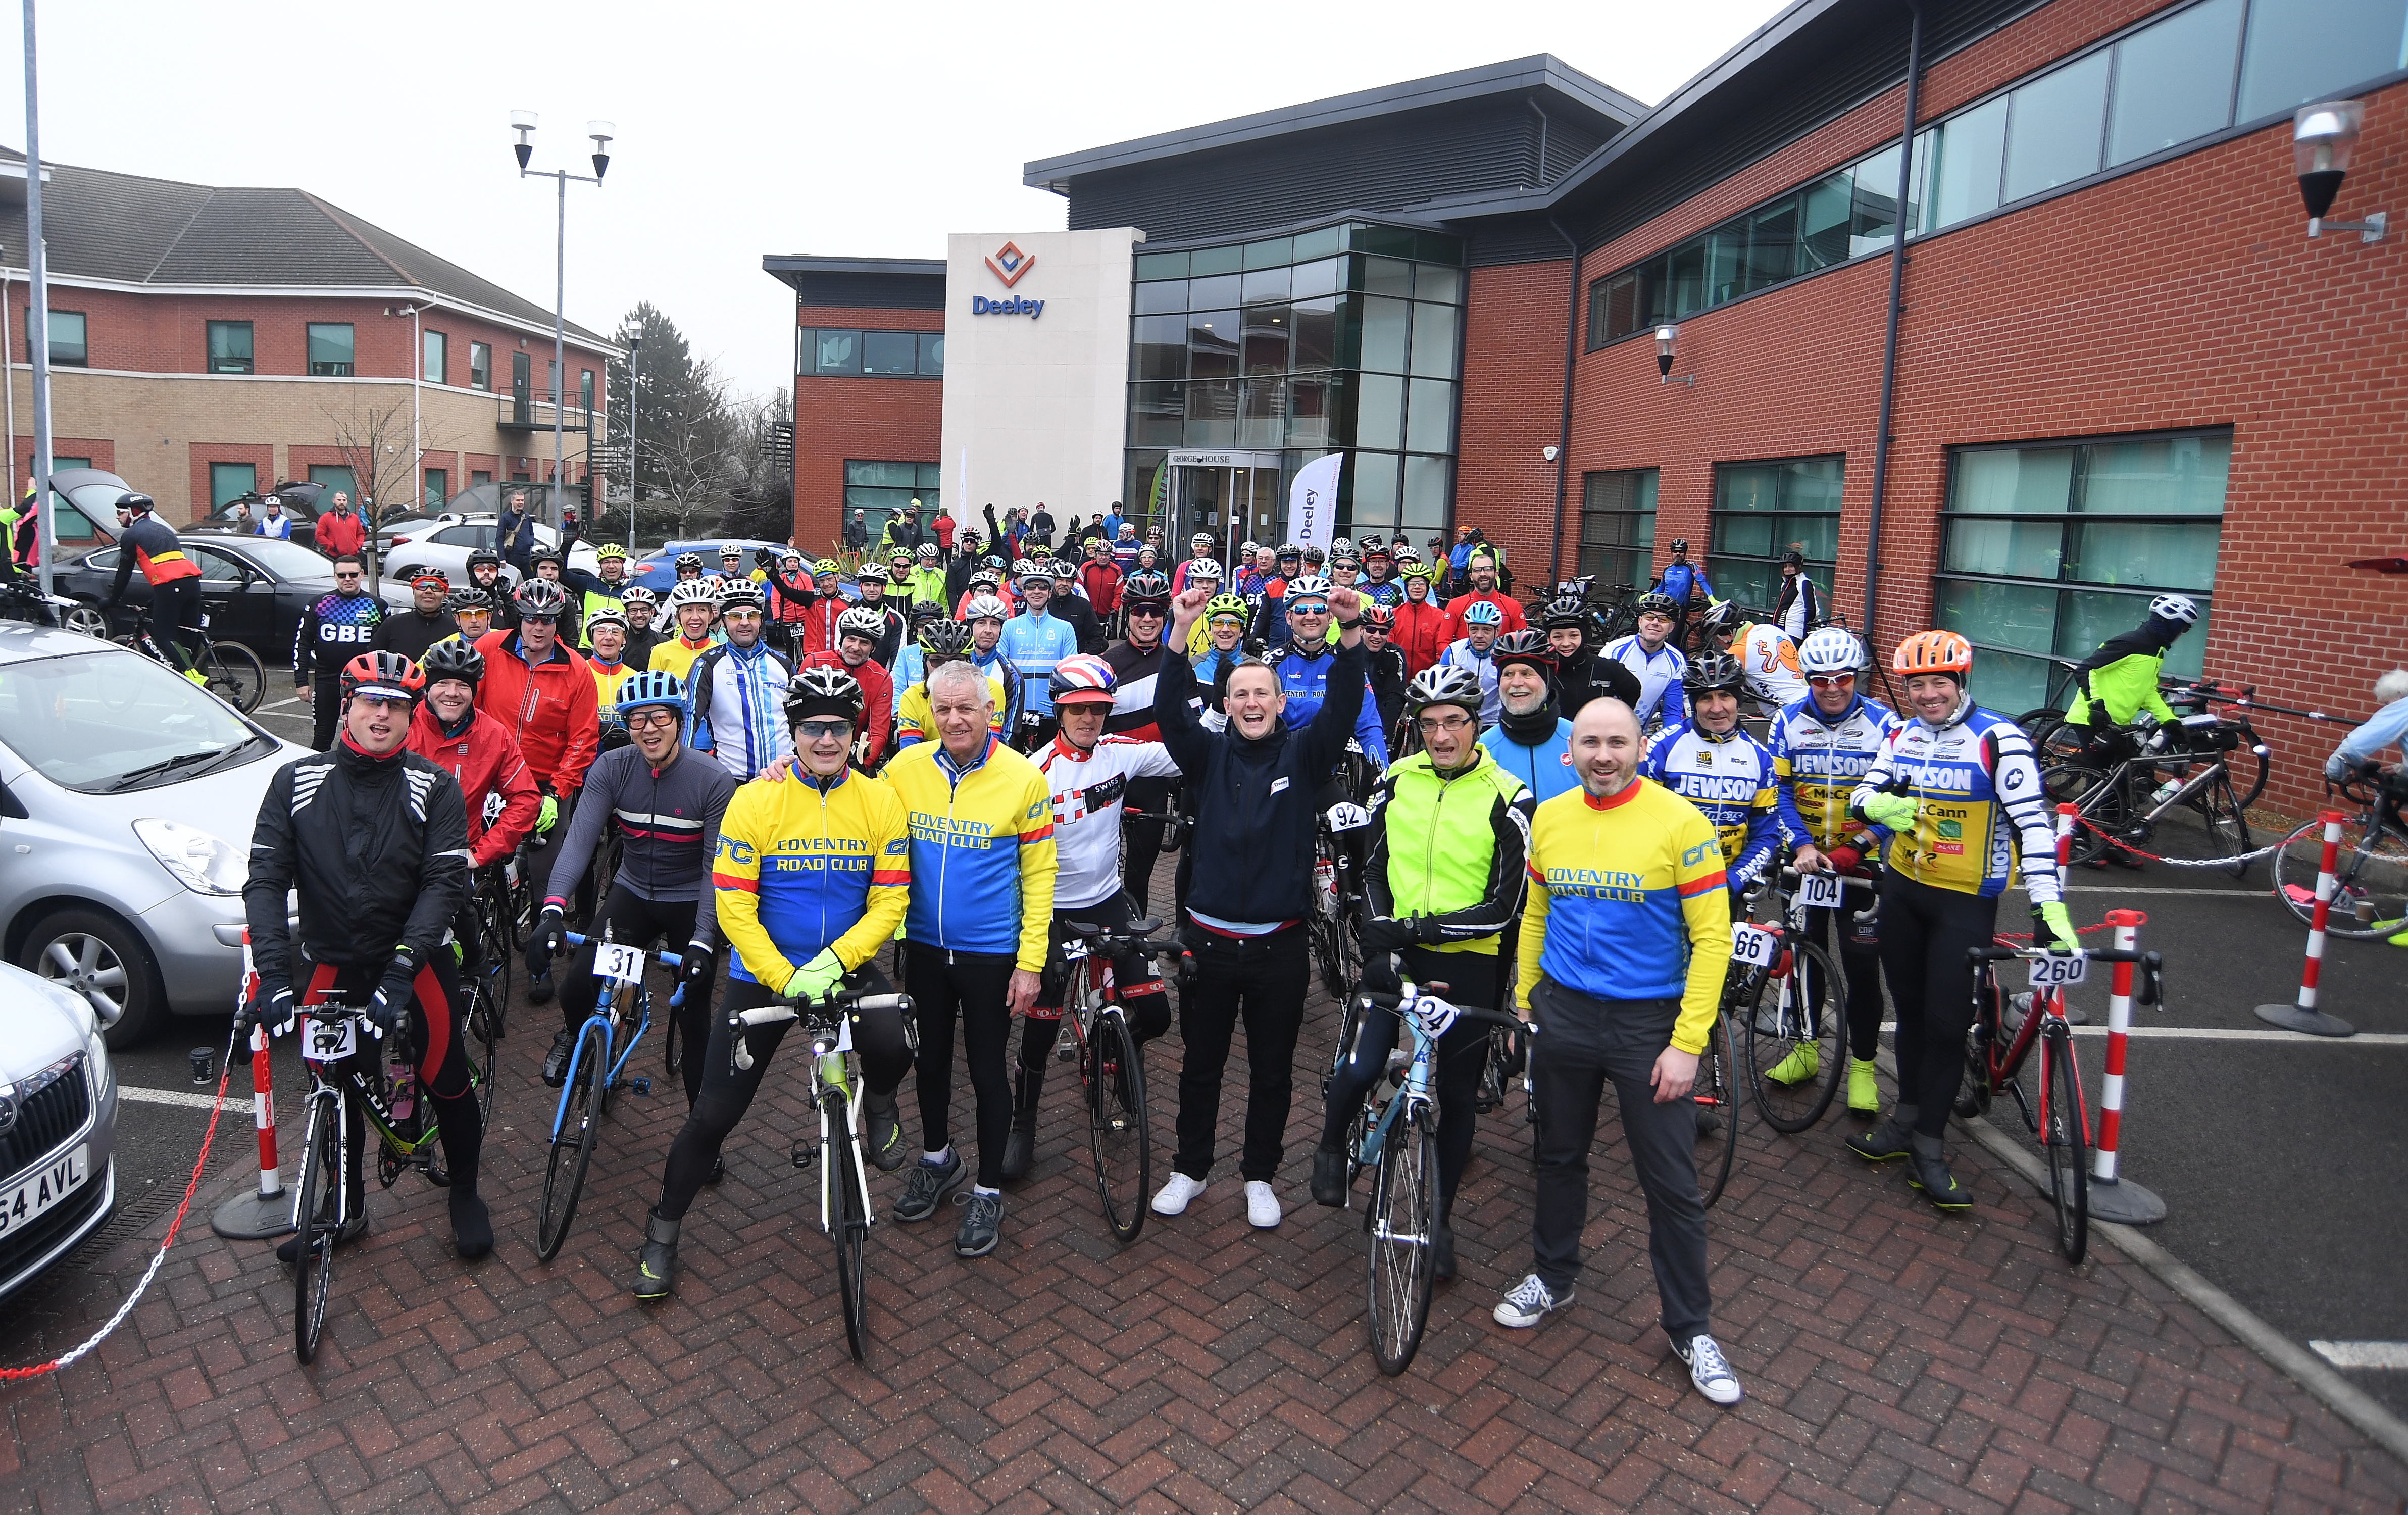 Coventry charity cycle ride raises funds to support one week's care for a child